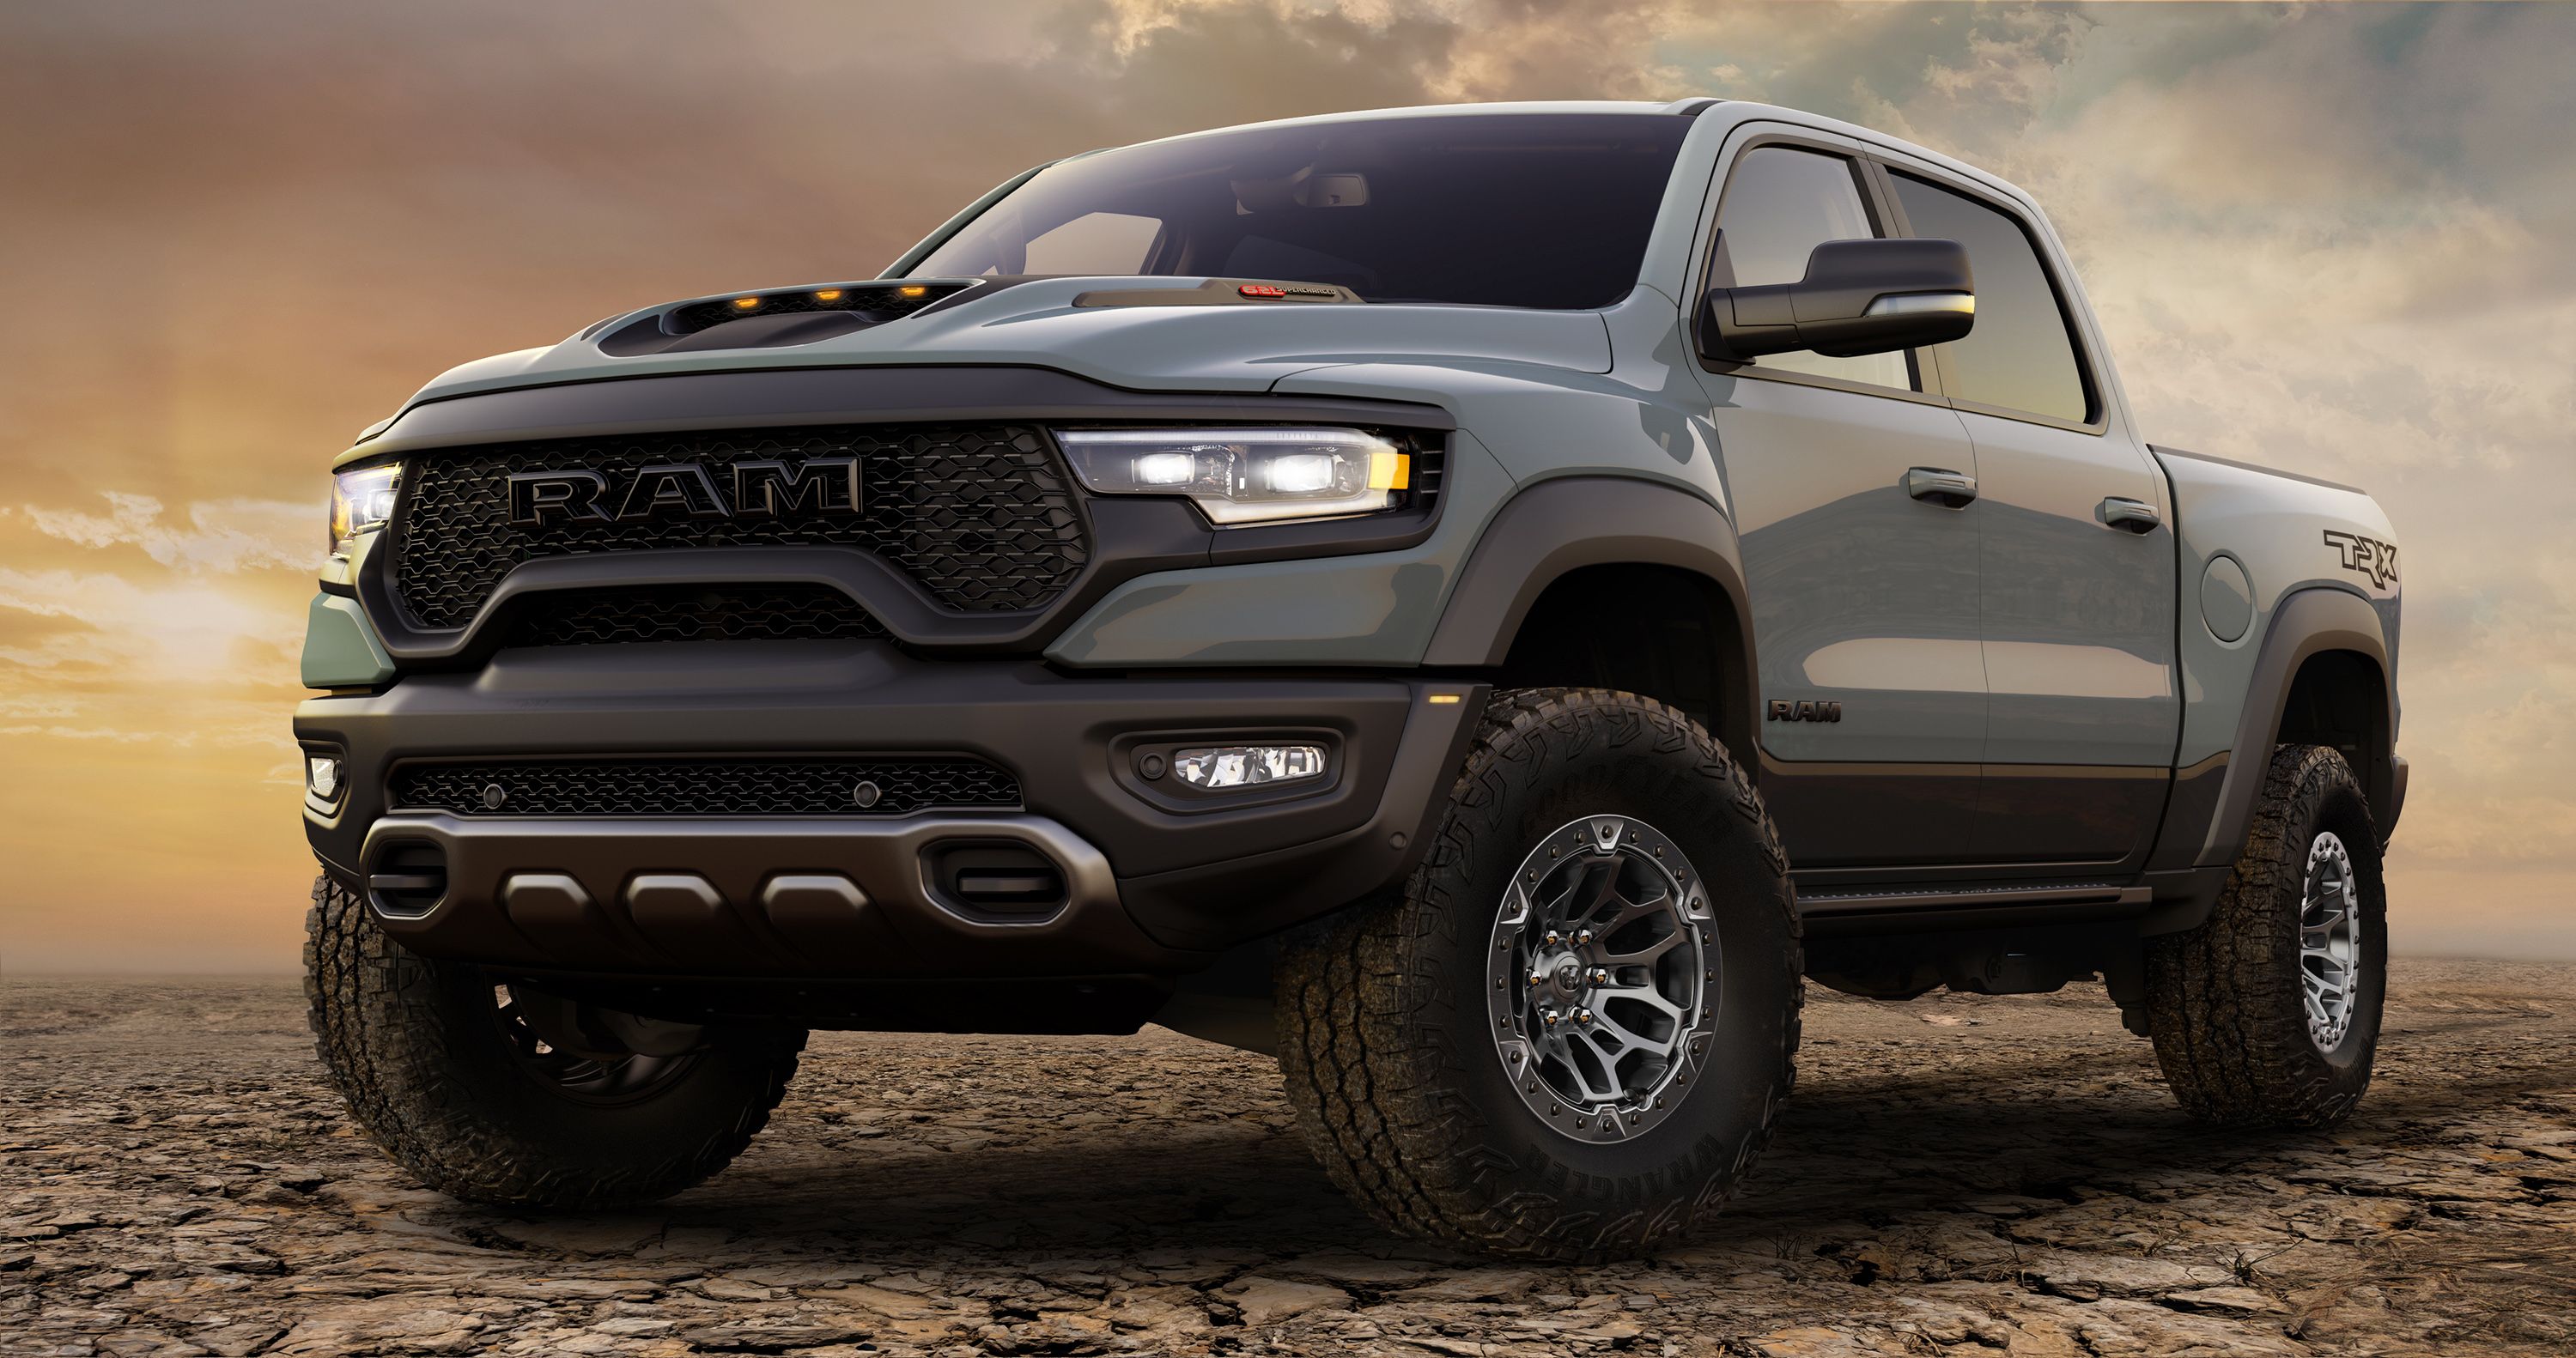 2020 The Ram 1500 TRX Could Be Offered In More Affordable Form With Less Power